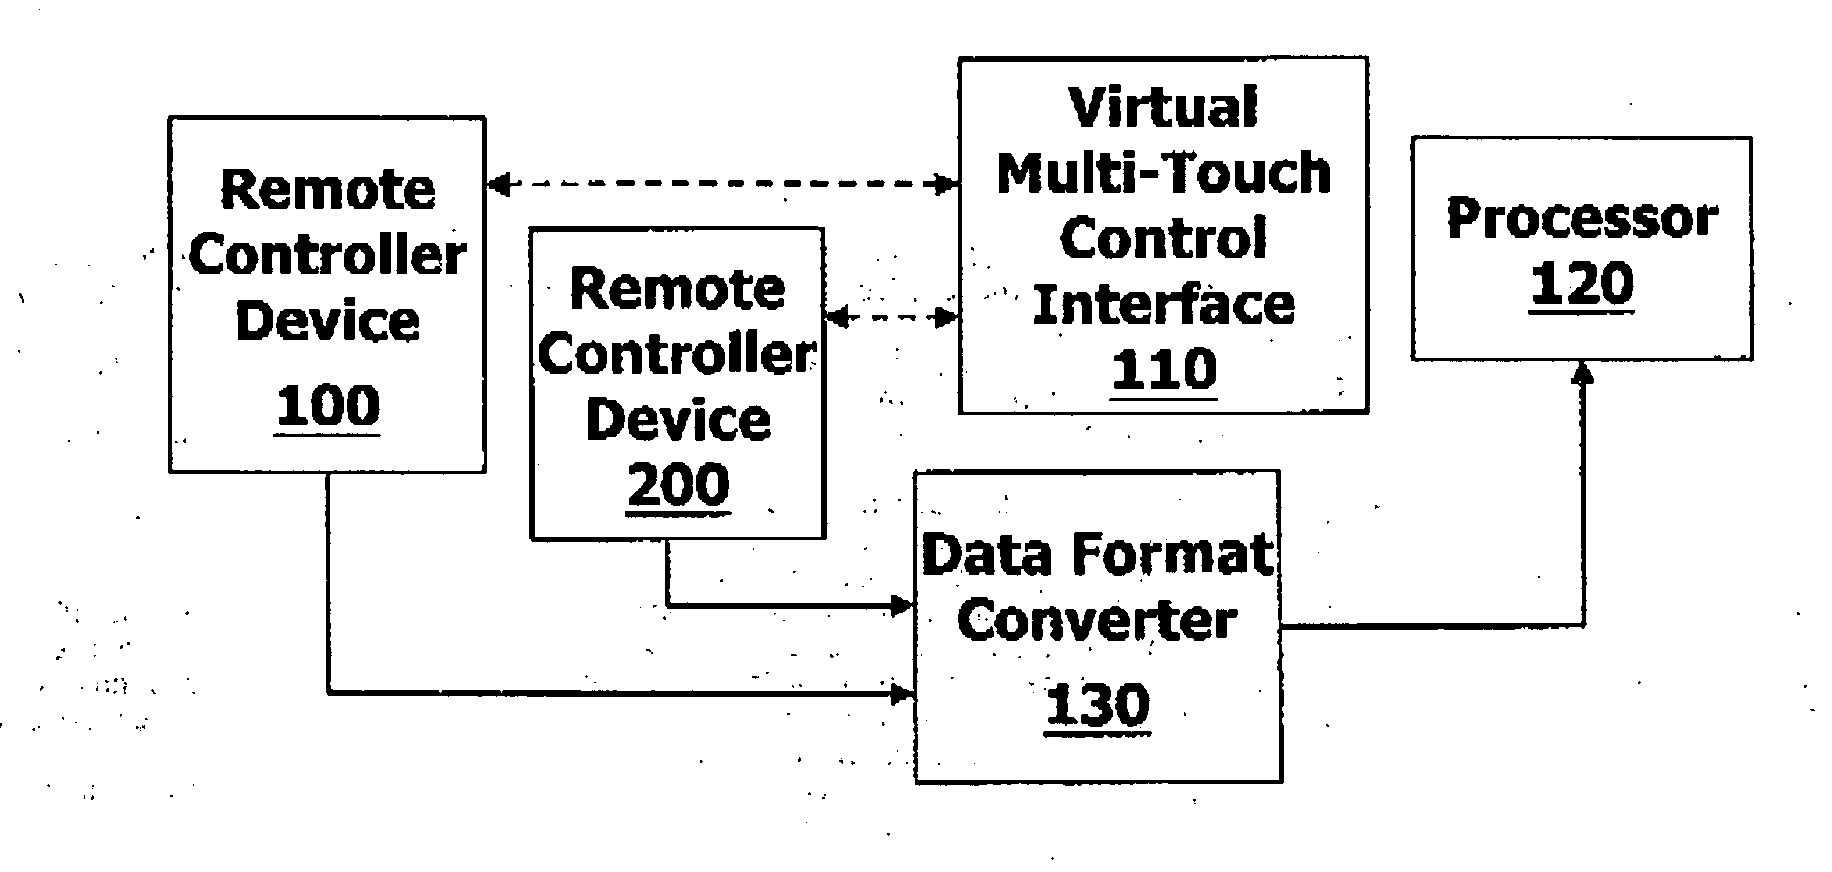 Virtual Multi-Touch Control Apparatus and Method Thereof